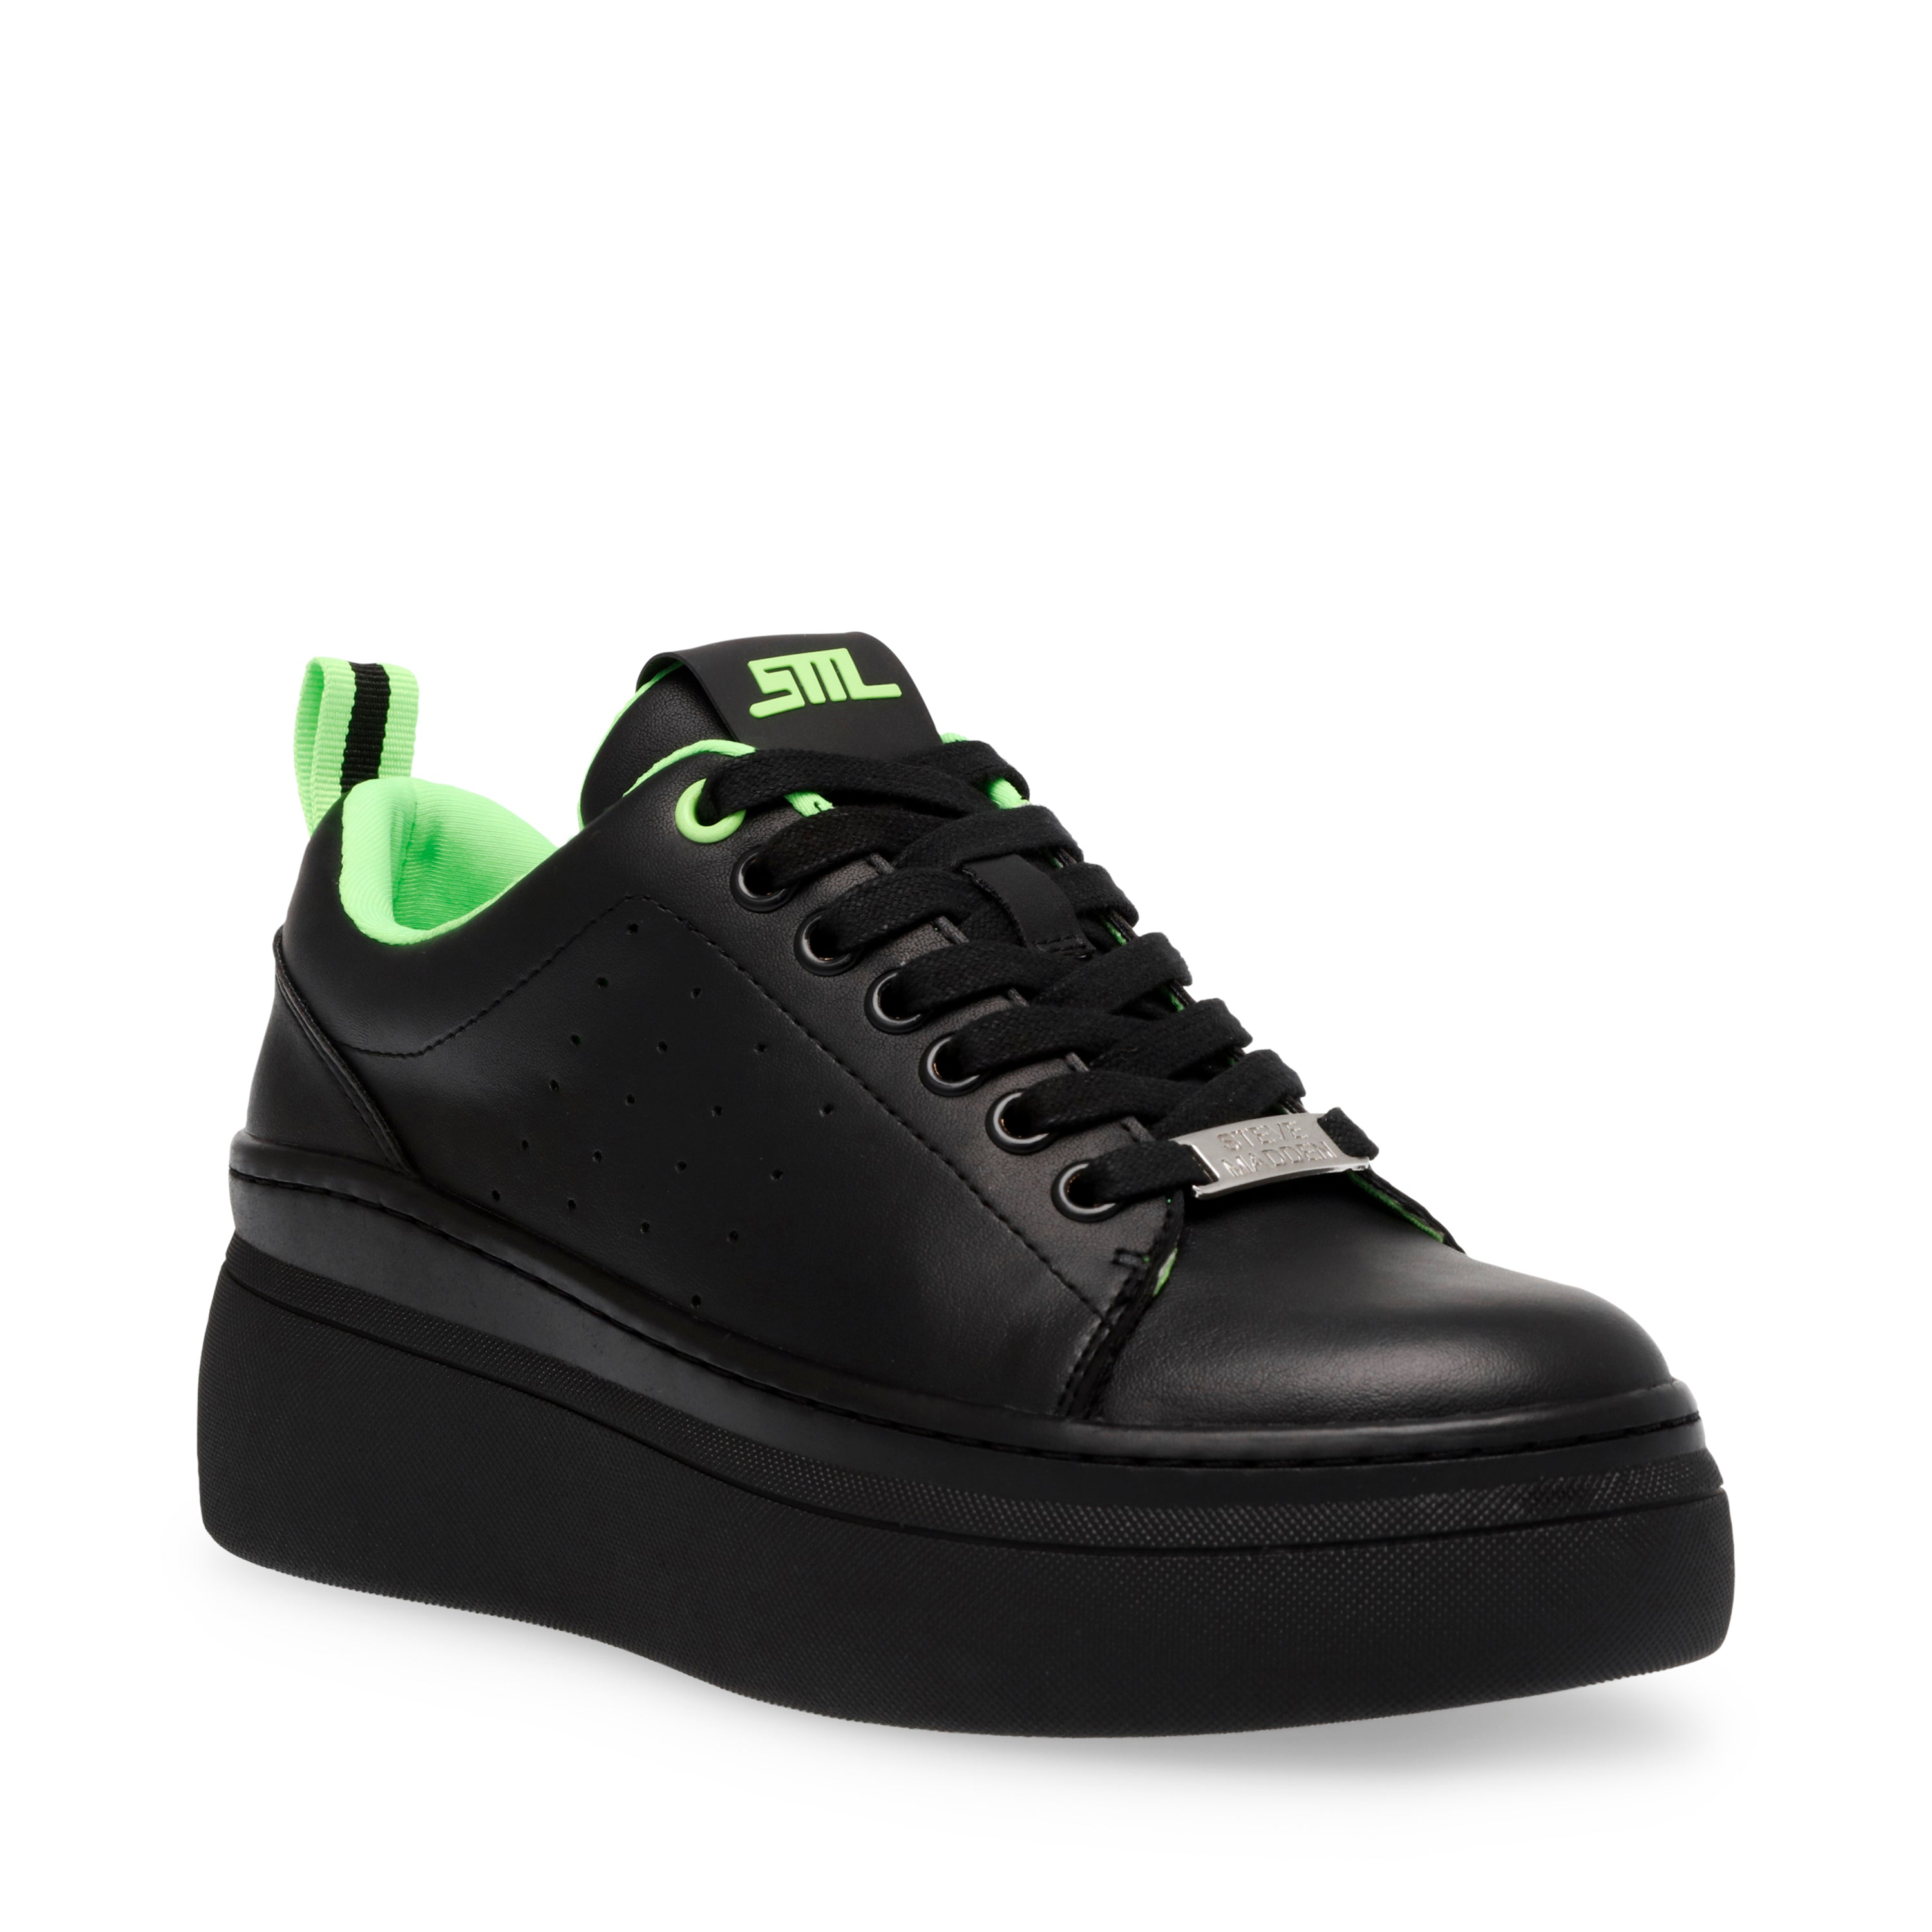 ALL STAR BLACK/GREEN- Hover Image